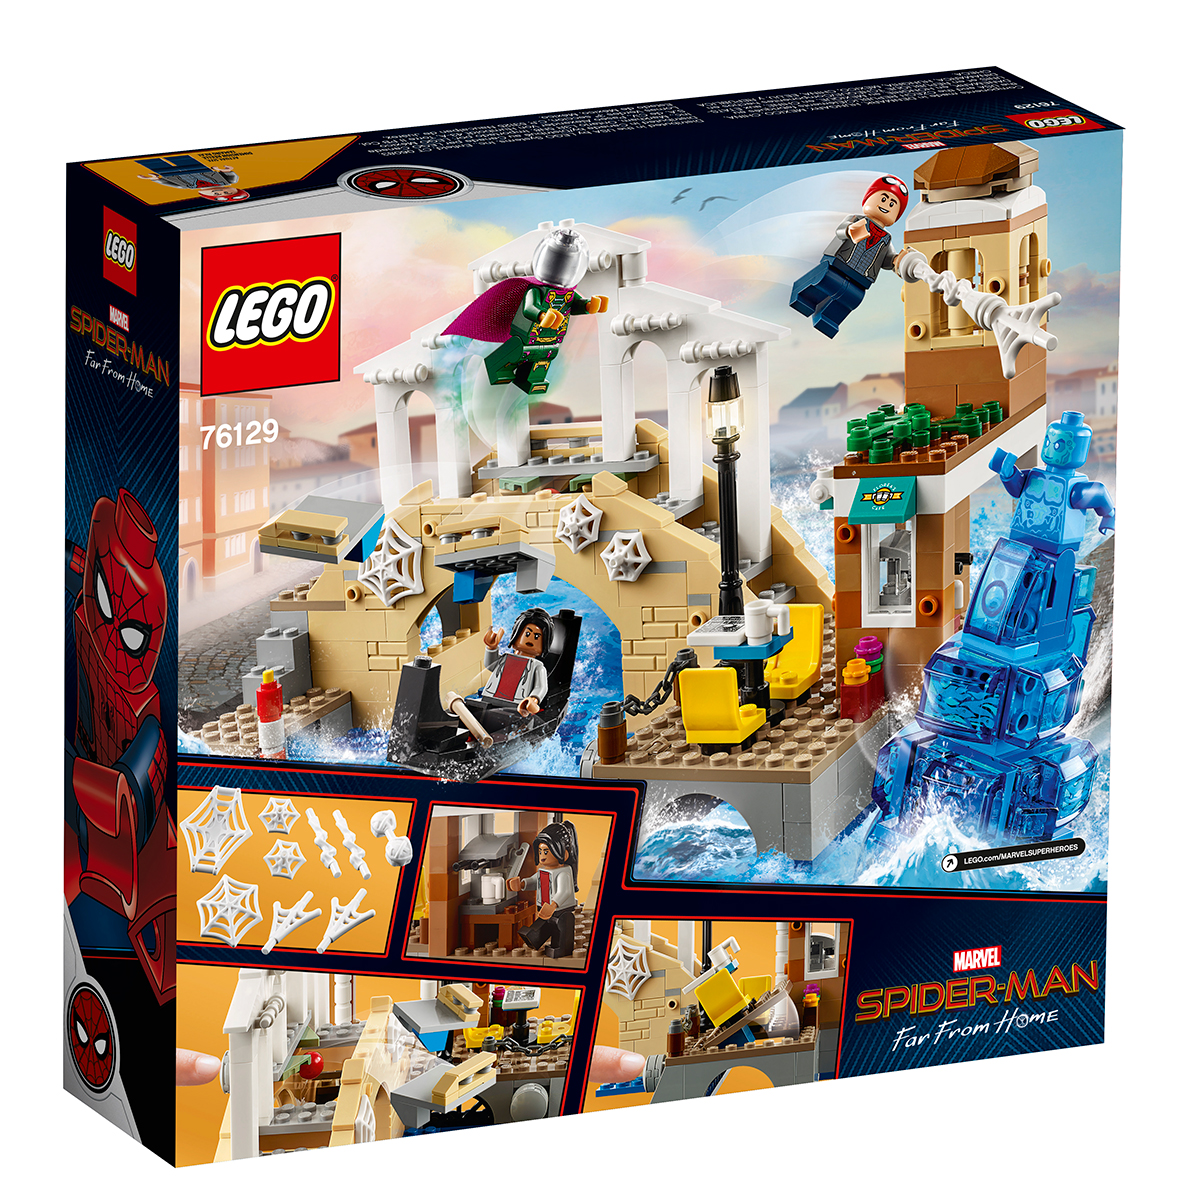 LEGO Spider-Man Far From Home